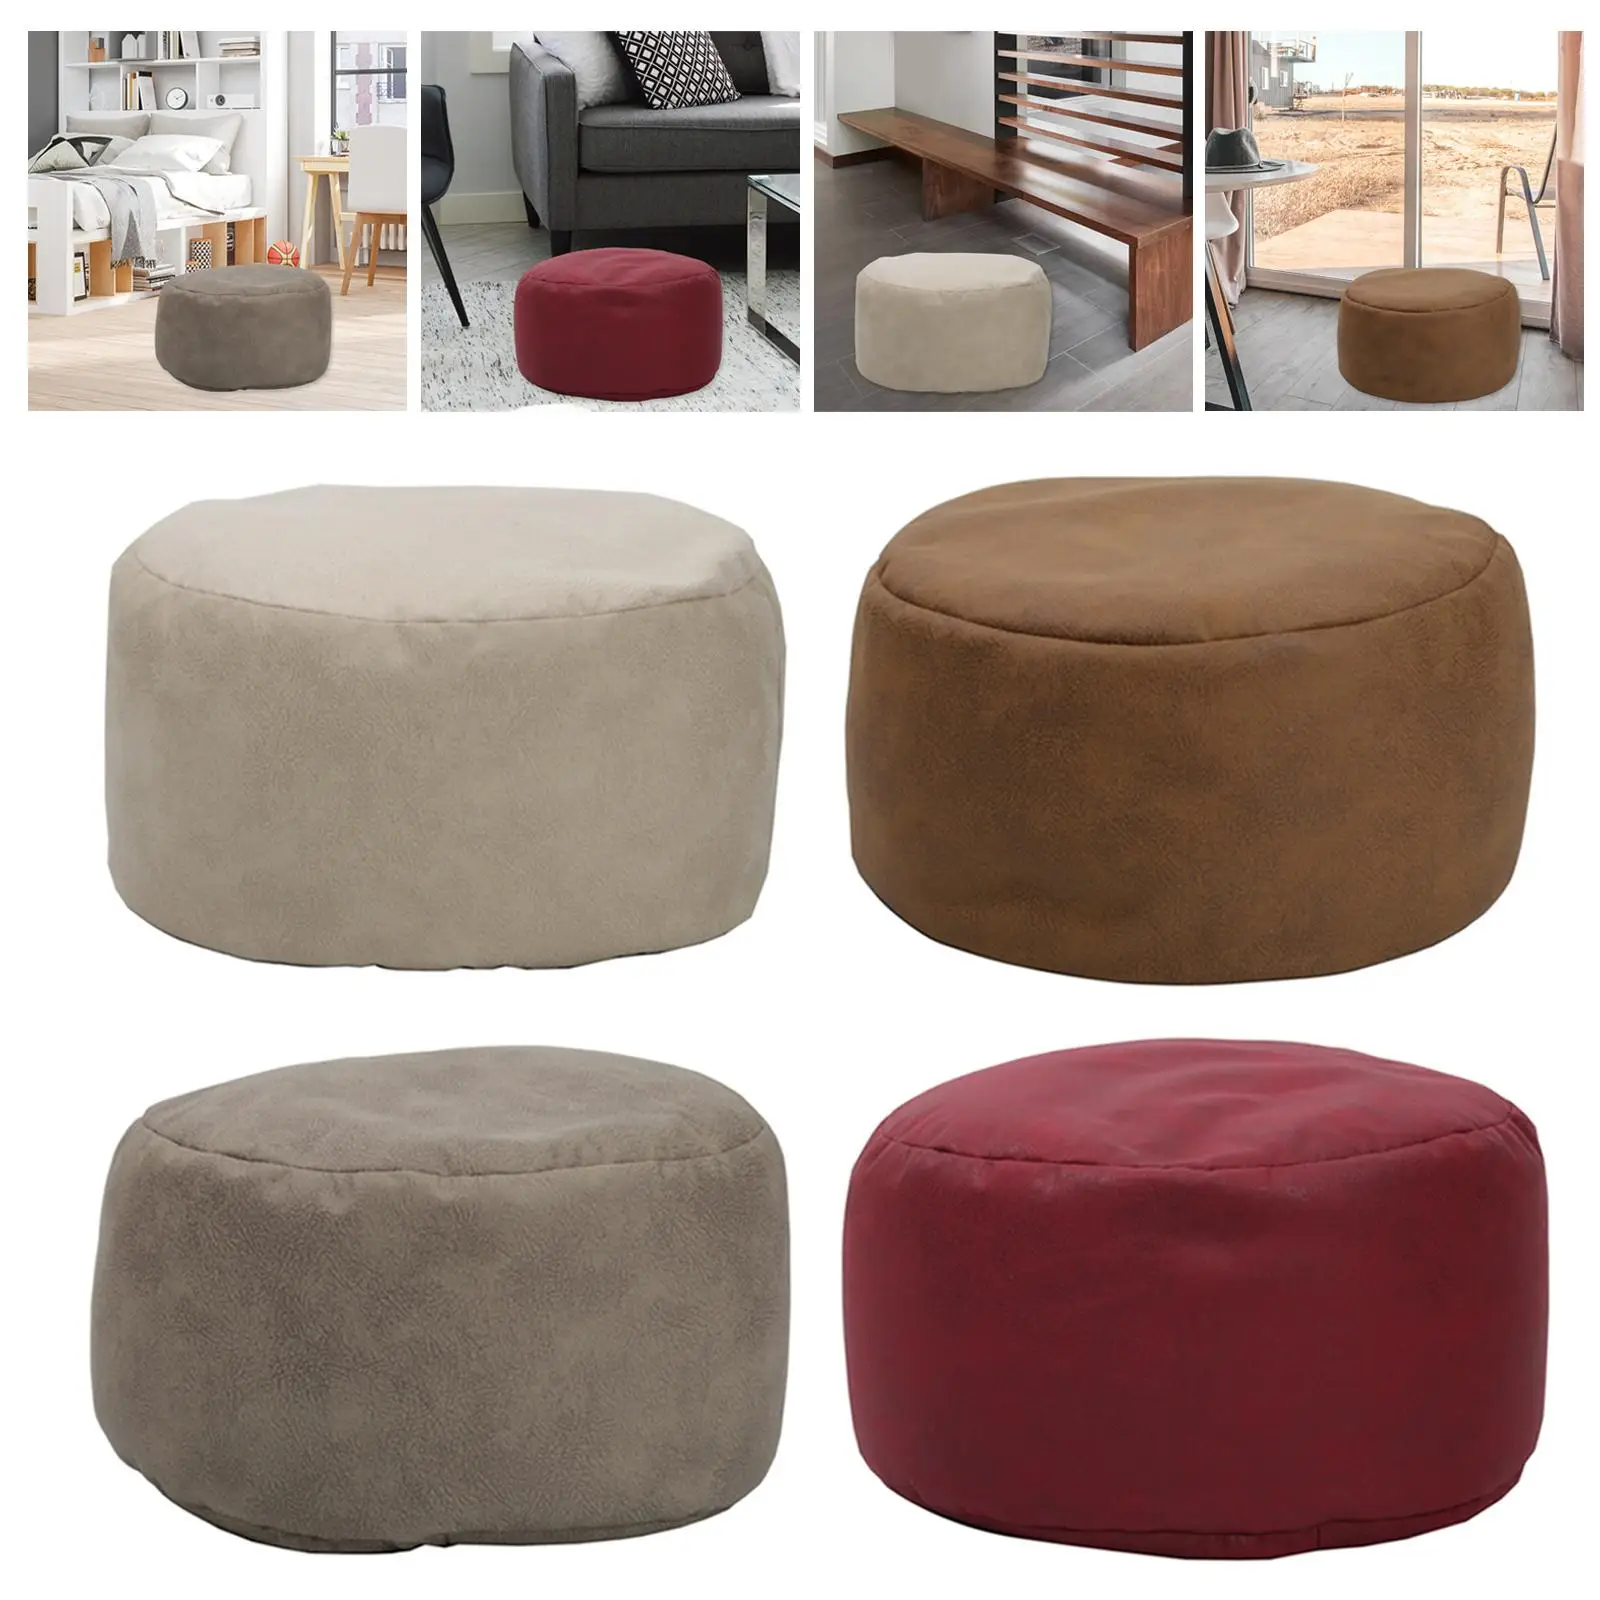 

Footstool Cover Organizer Decor Small Furniture Without Filling Technology Cloth Tatami Slipcover for Living Room Bedroom Adults